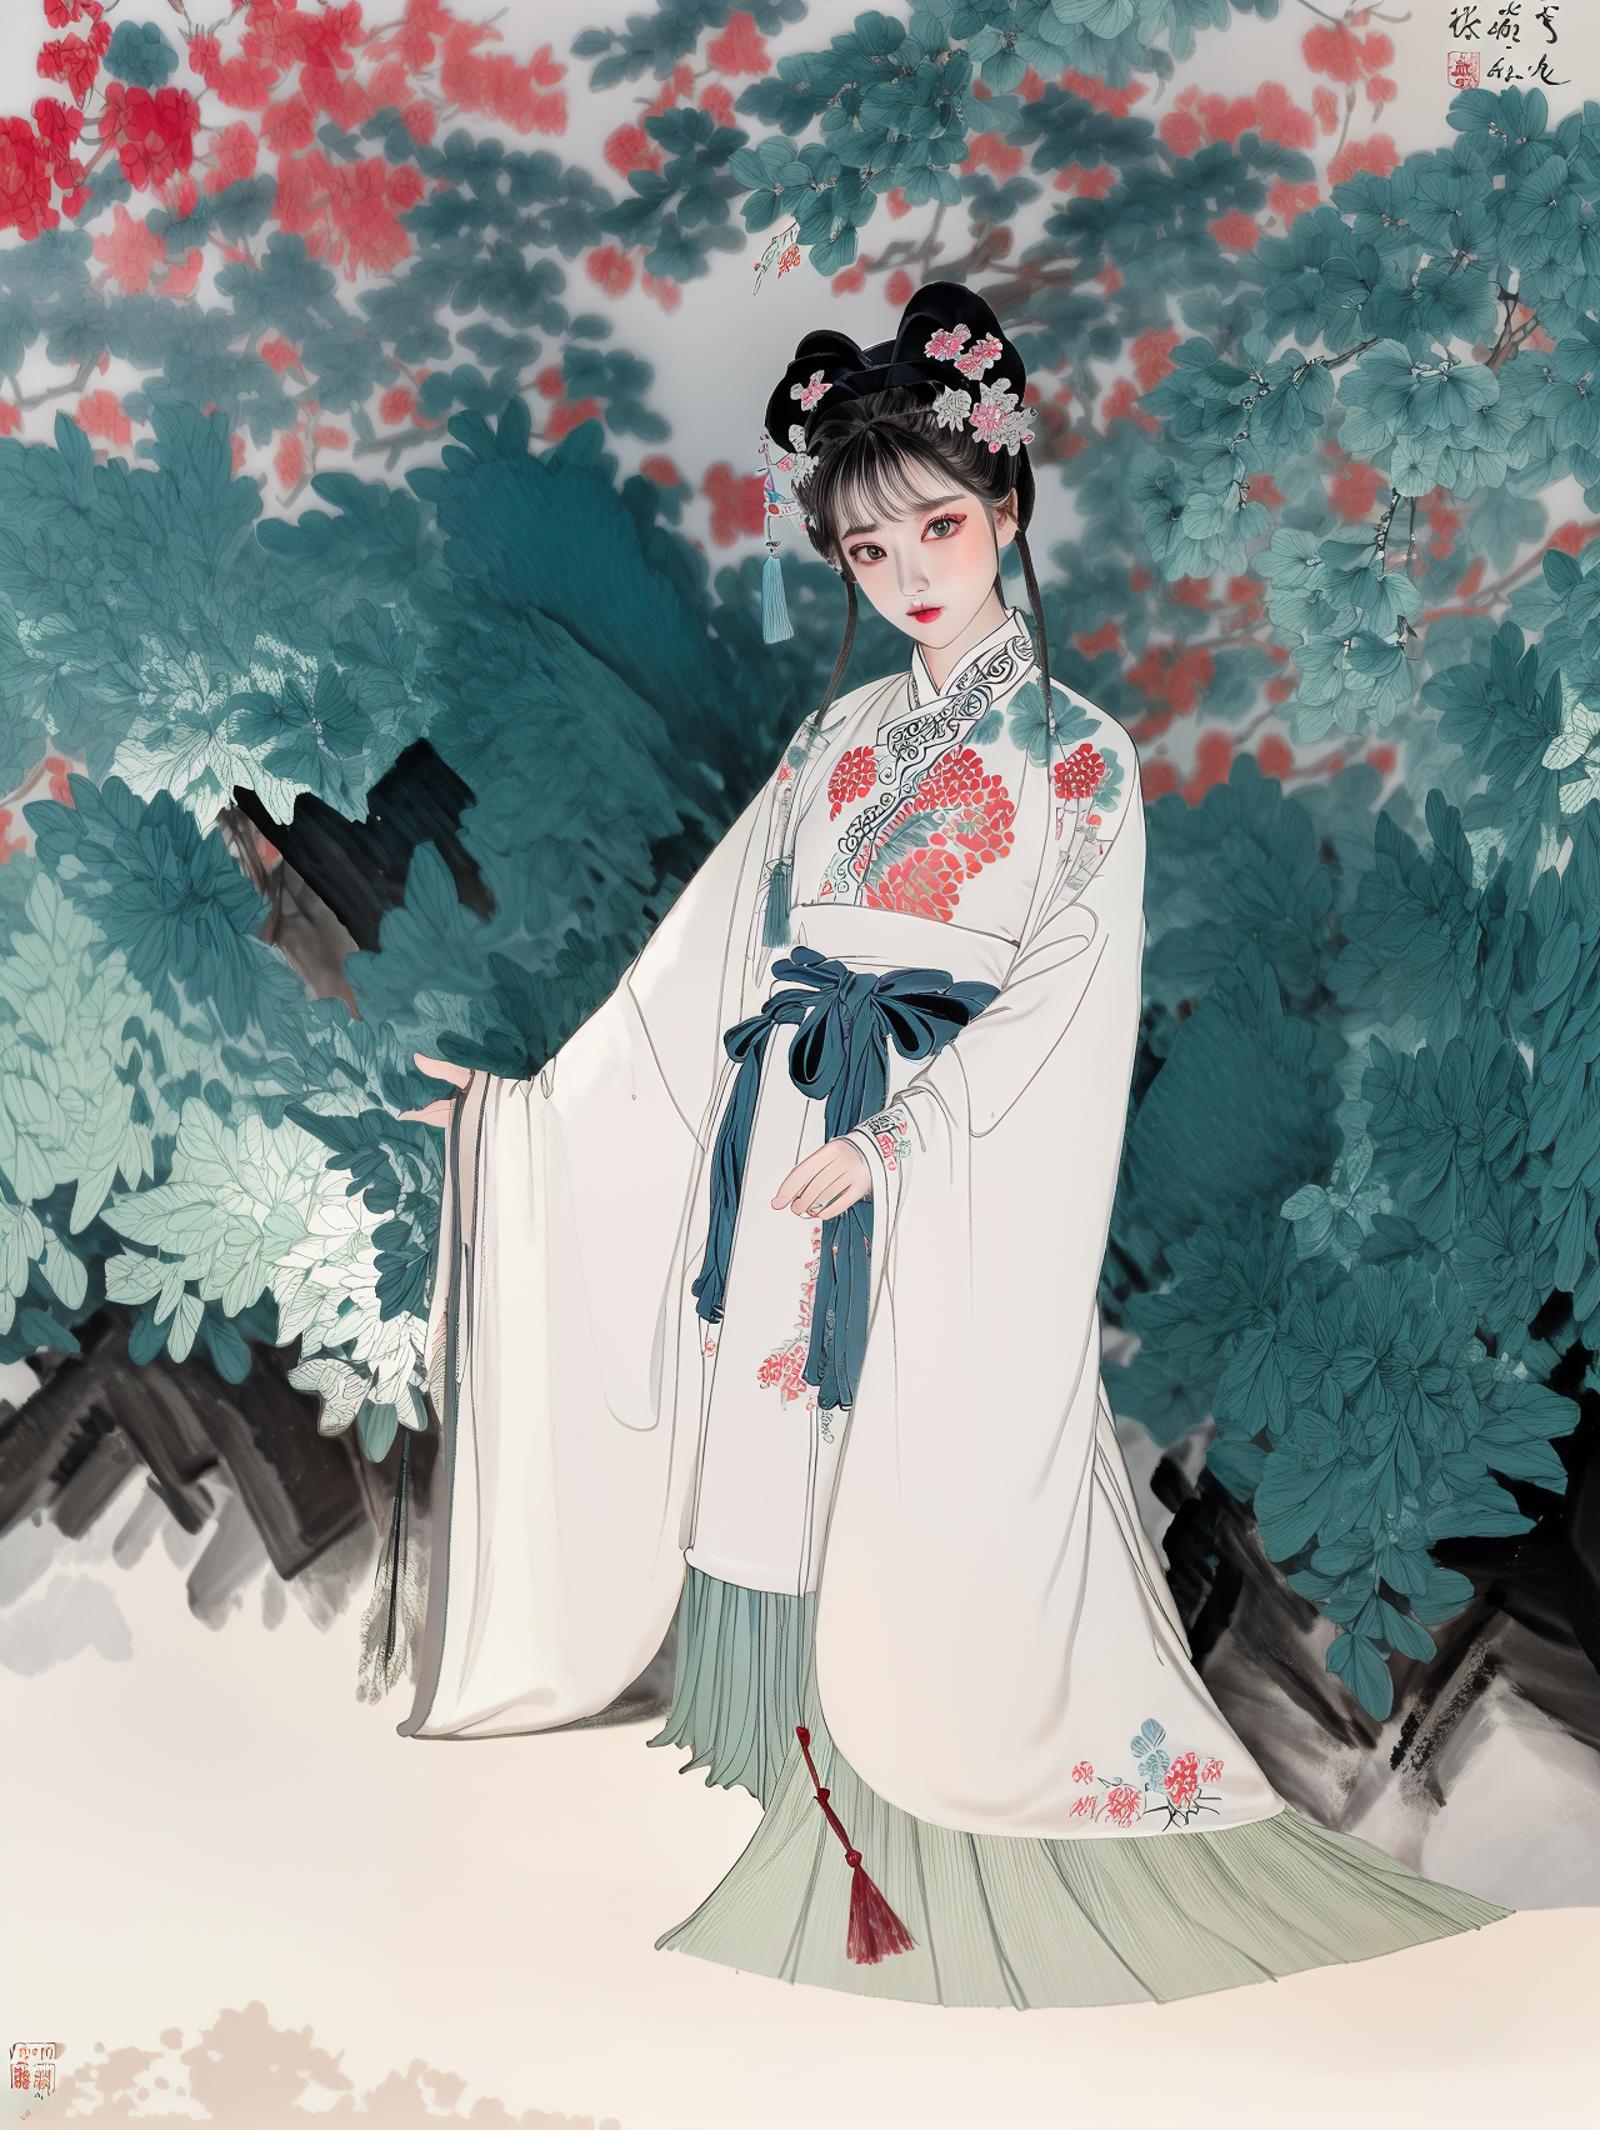 A pretty Asian woman wearing a white dress with a blue sash and a flower in her hair.